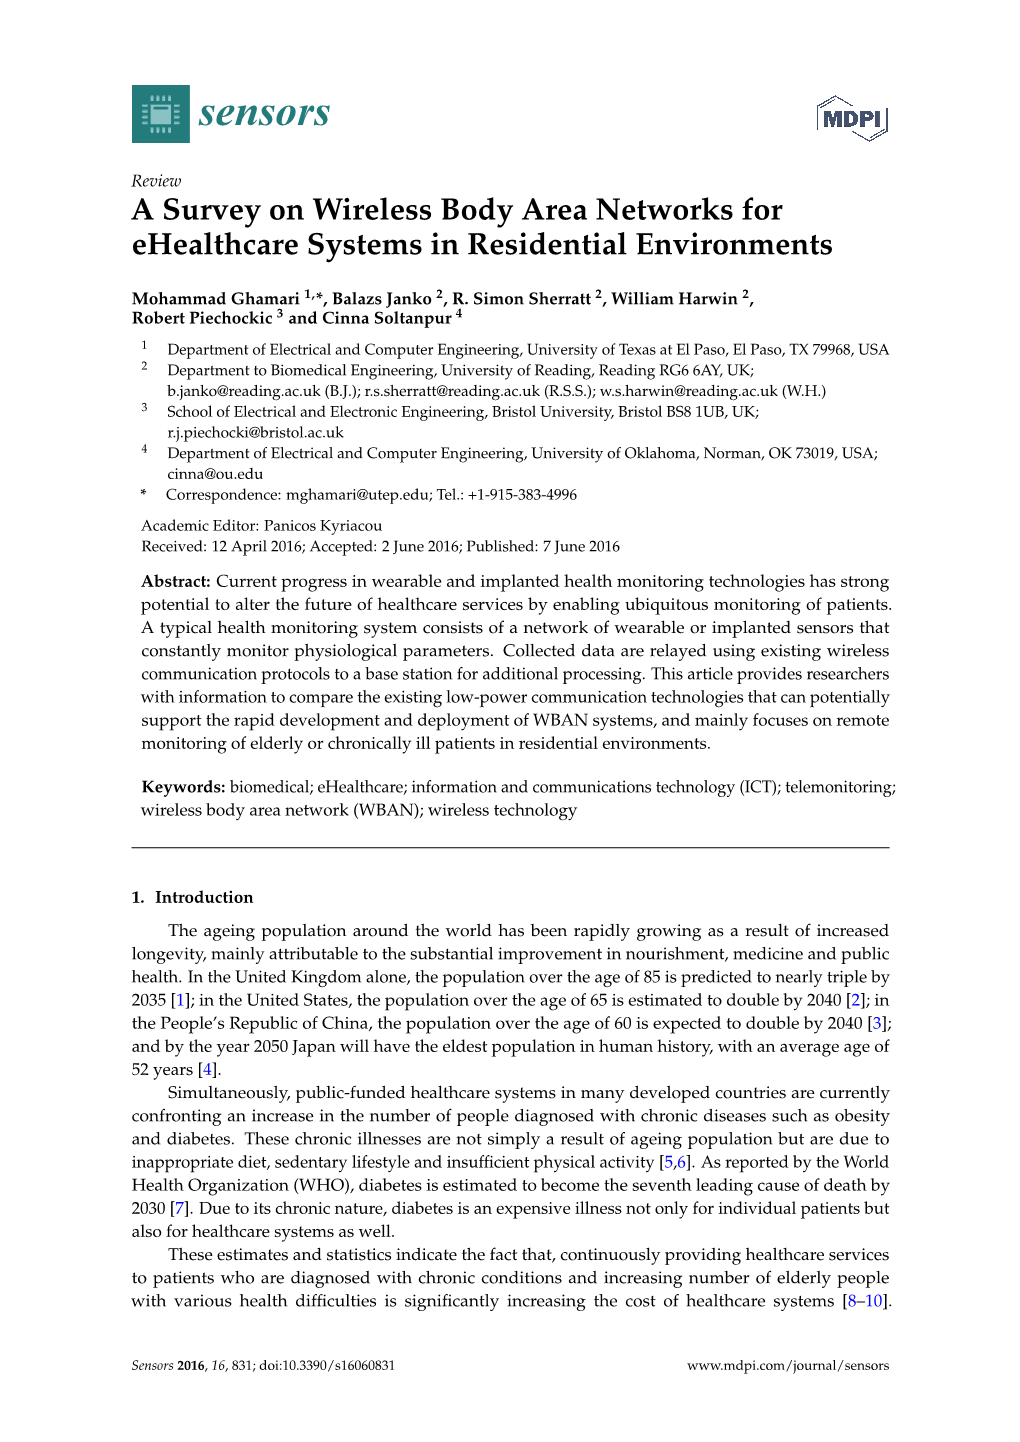 A Survey on Wireless Body Area Networks for Ehealthcare Systems in Residential Environments